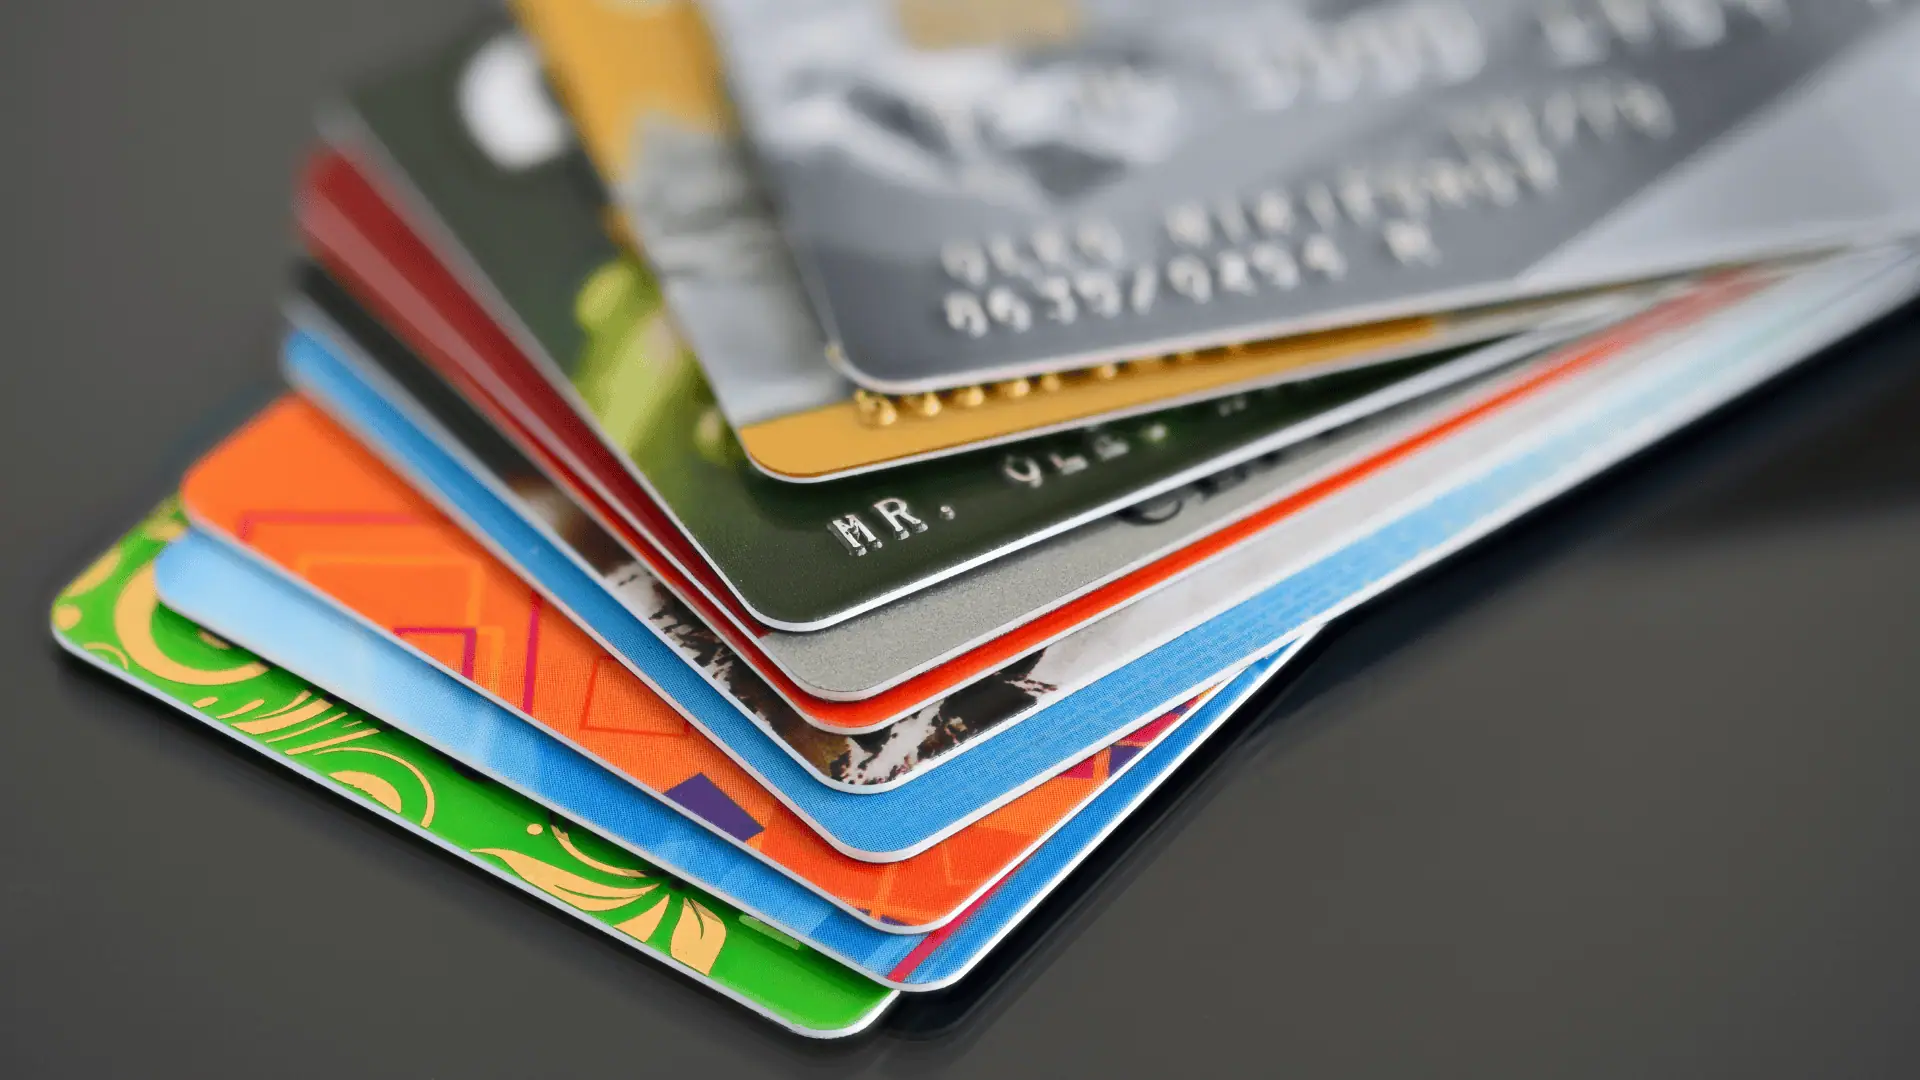 Lifetime-free-credit-cards